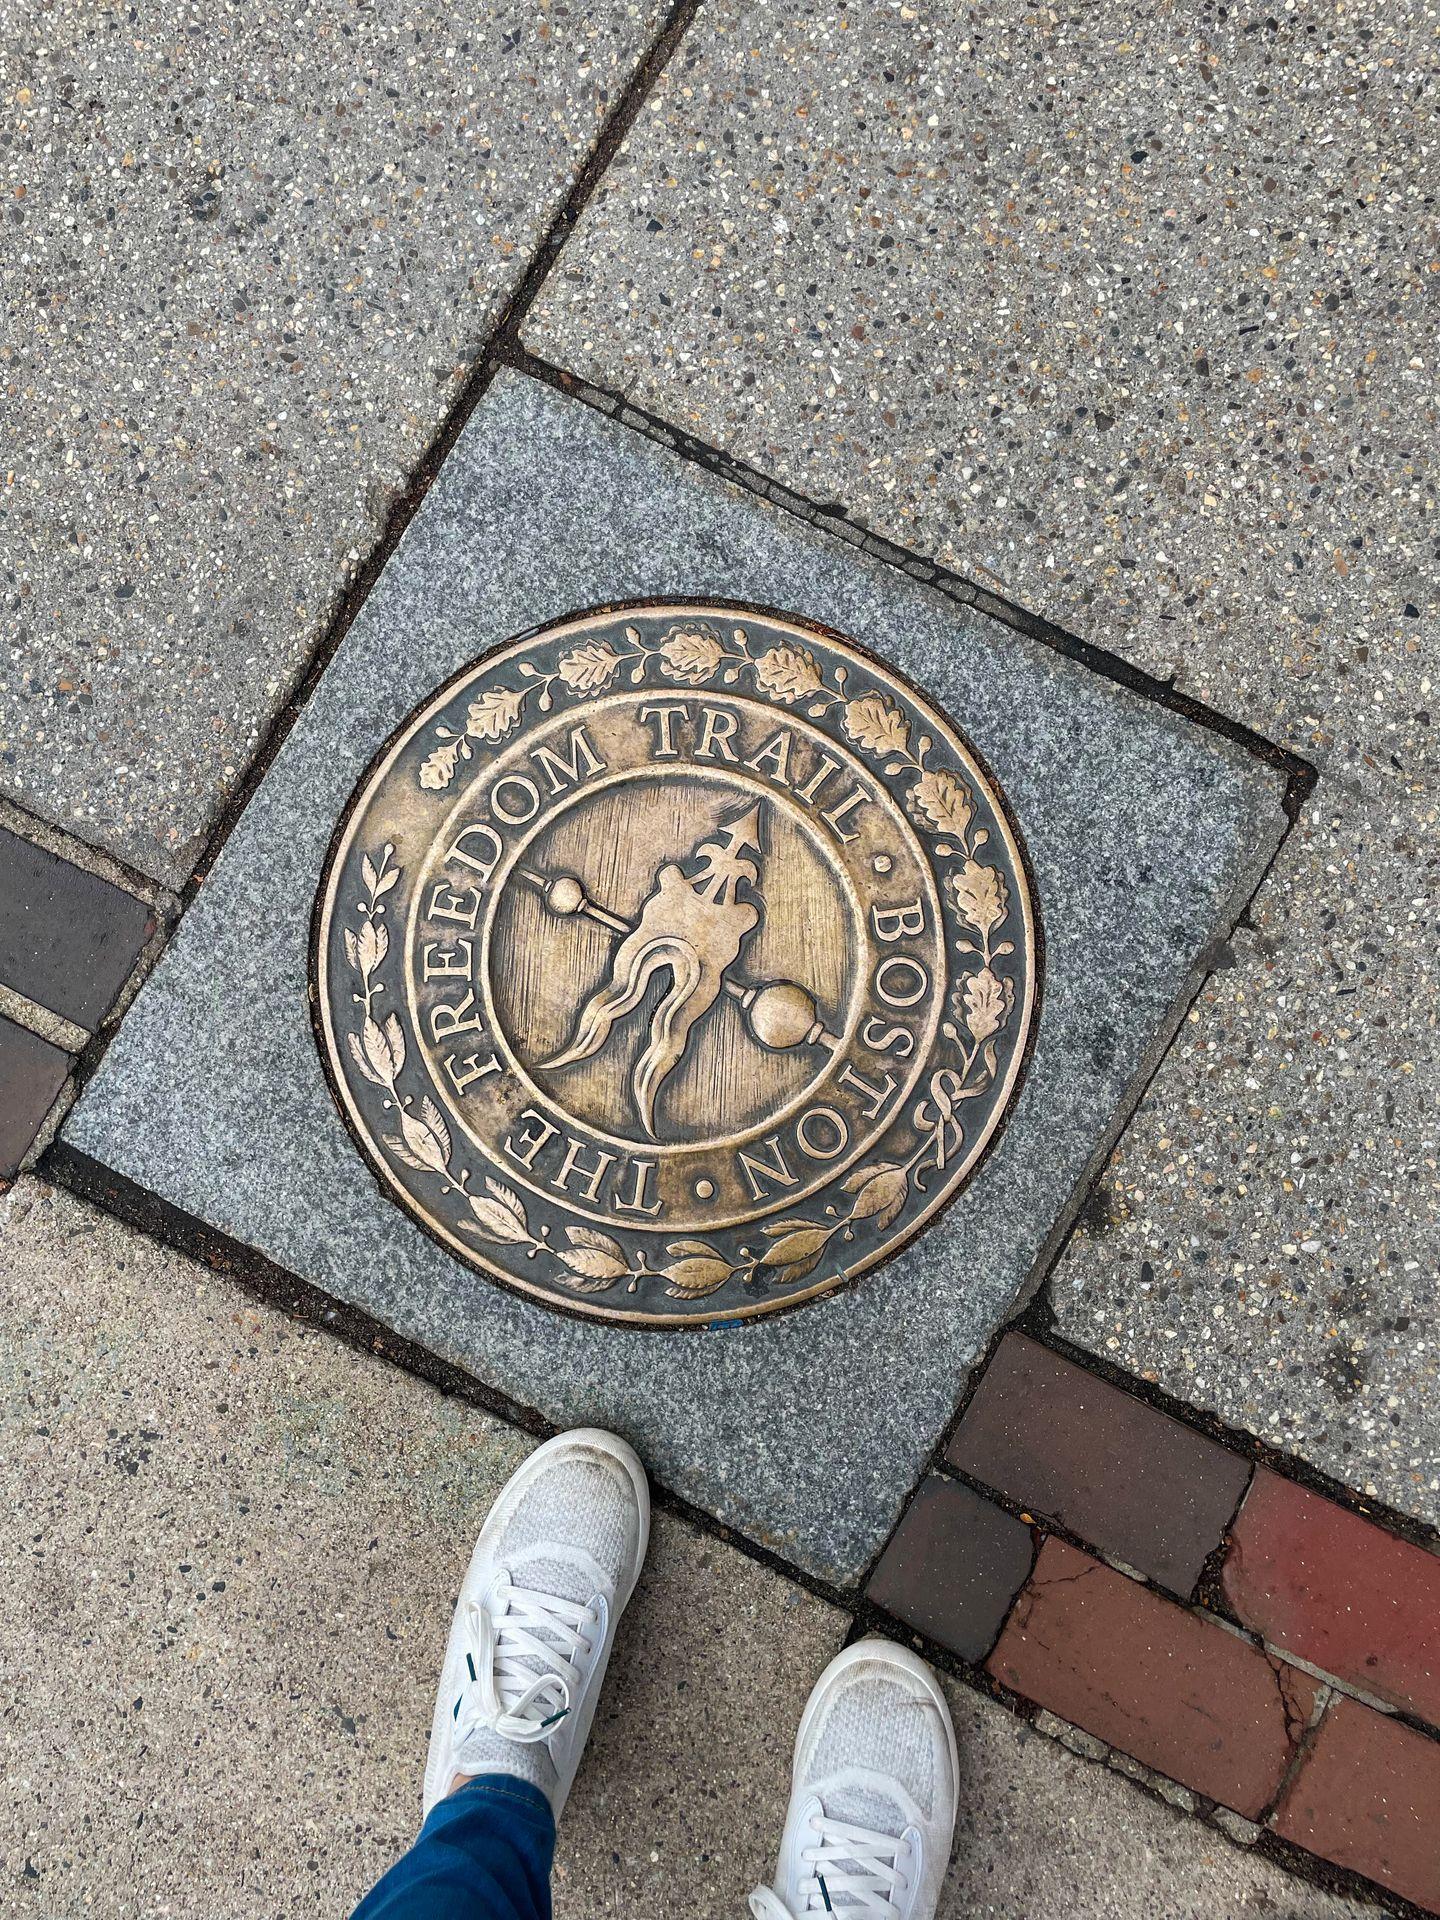 A plague on the ground that marks the Freedom Trail in Boston. The label is gold and Lydia's feet are next to the sign.